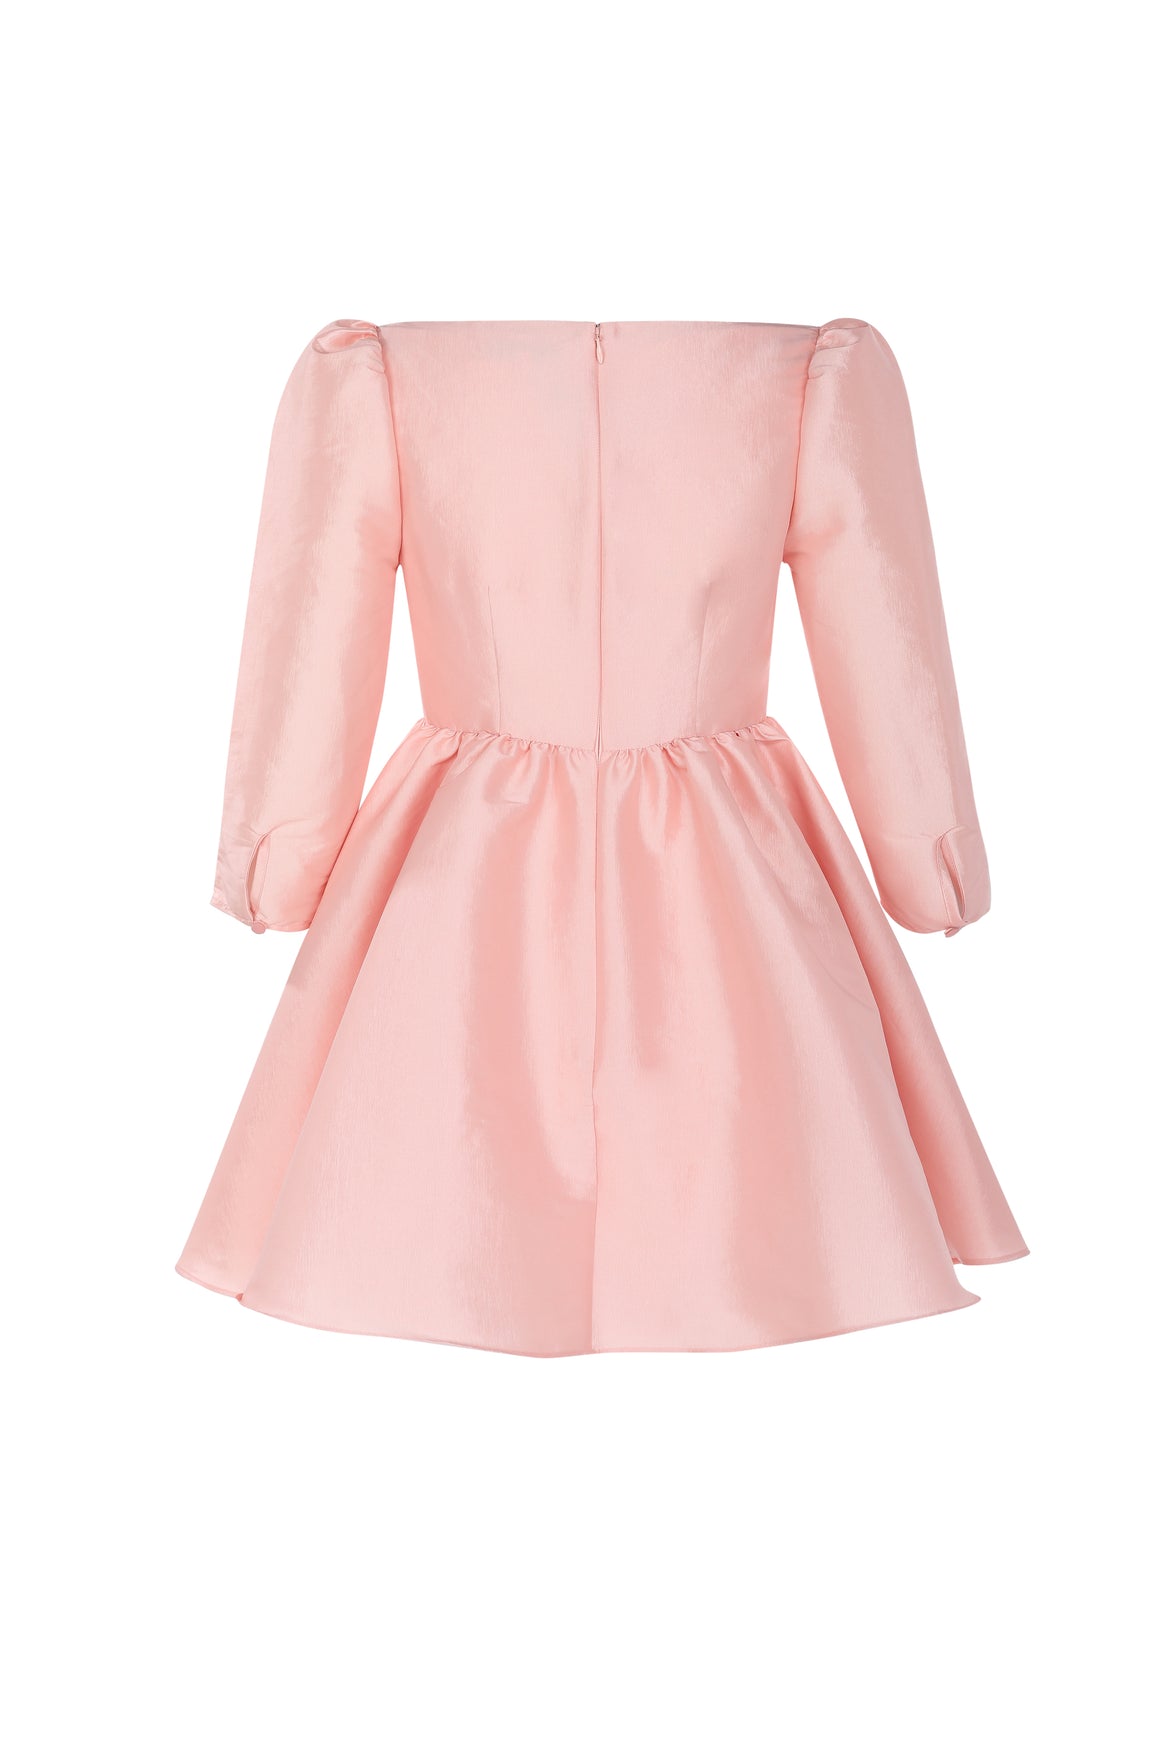 Party Girl Dress-Dresses-Maison Amory-Max & Riley